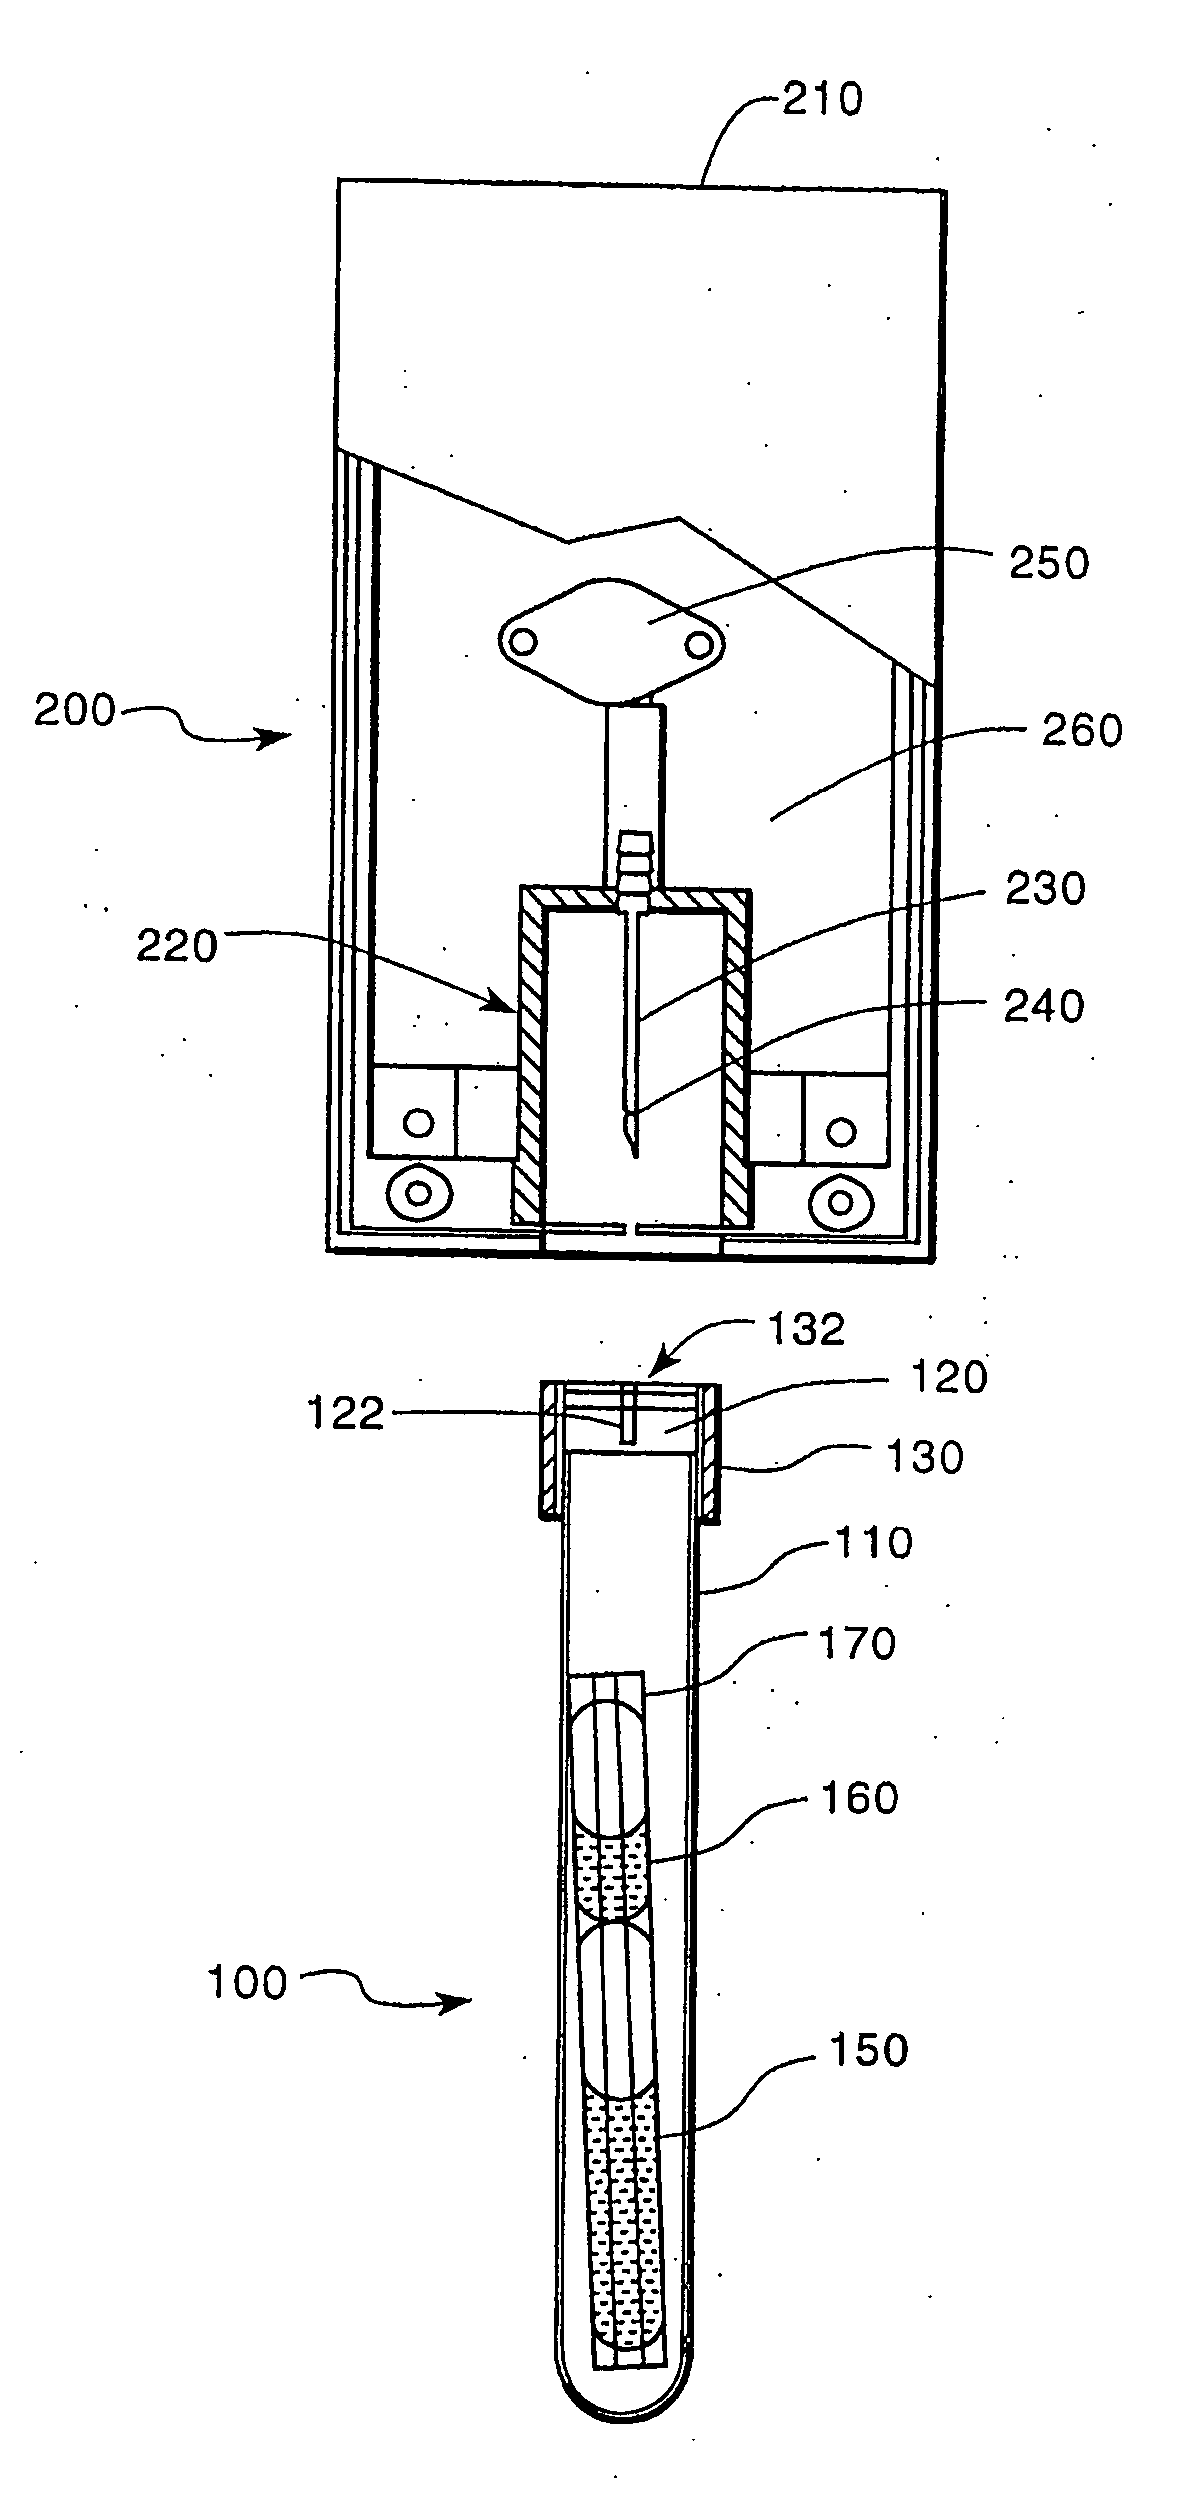 Apparatus and method for the detection of water in plants